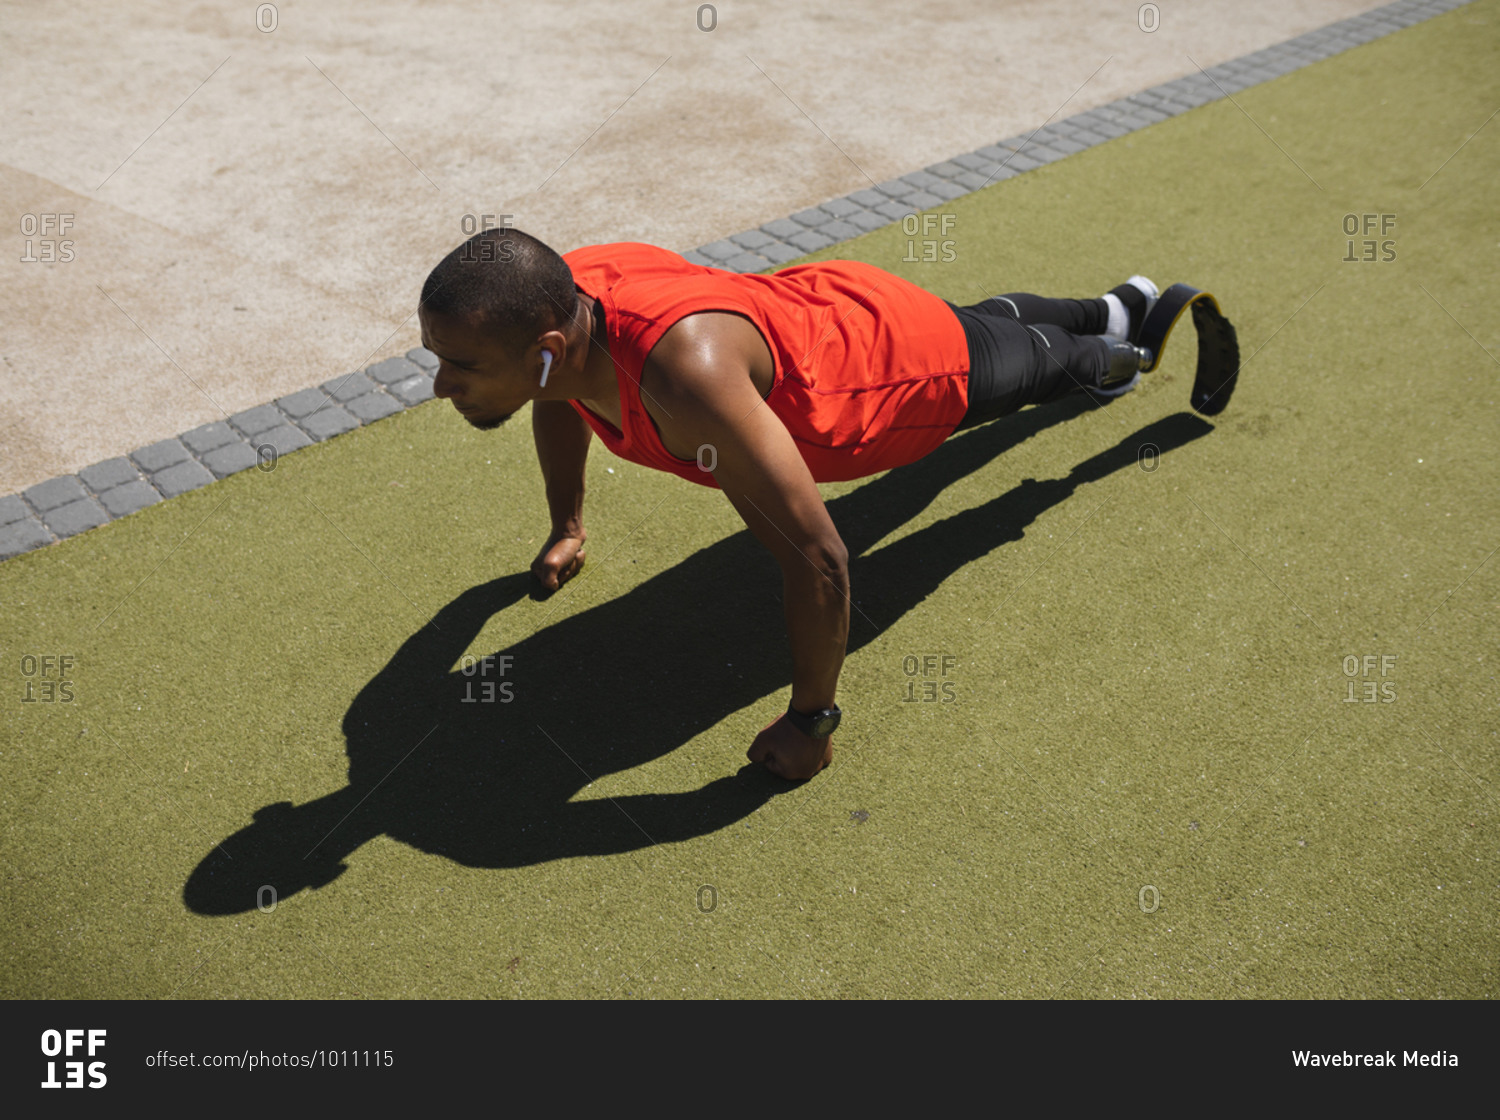 Disabled mixed race man with a prosthetic leg and running blade exercising at an outdoor gym by the coast wearing wireless earphones and doing press ups. Fitness disability healthy lifestyle.